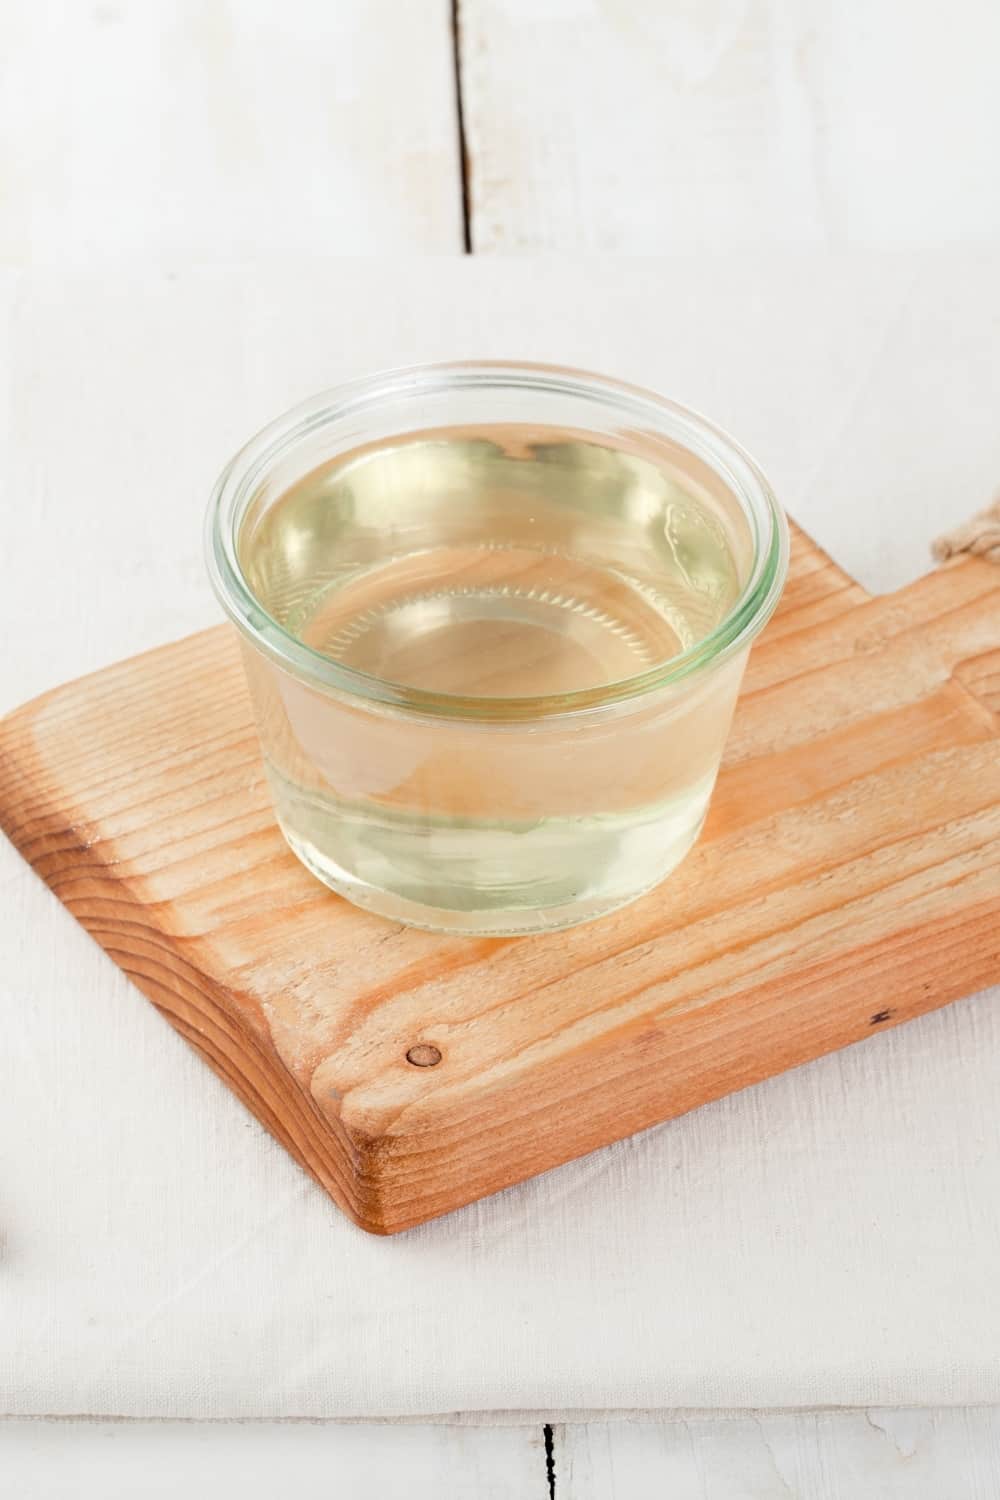 Sugar syrup in a glass bowl on a white wooden background